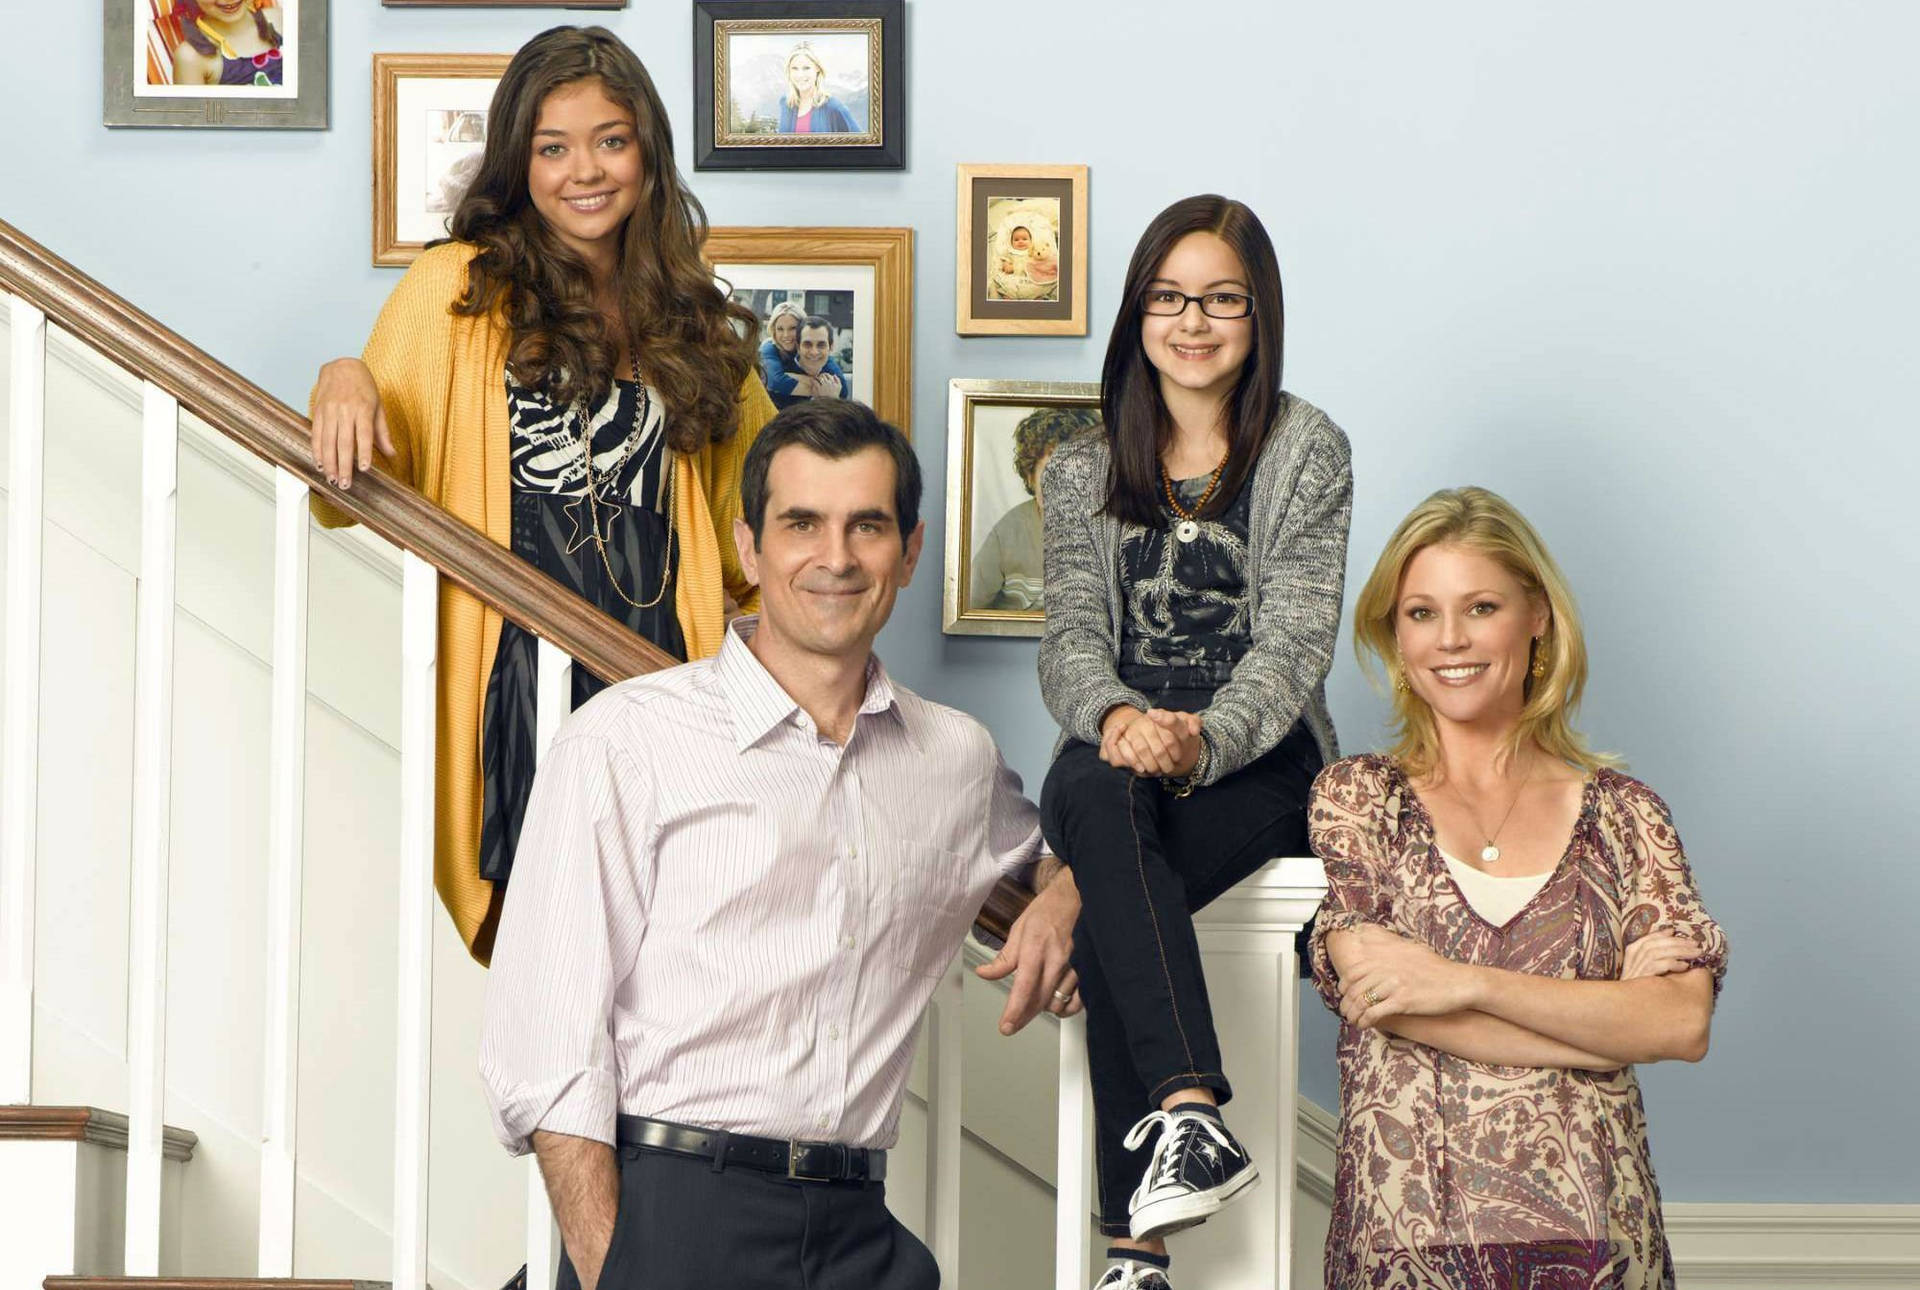 The Dunphy Family - The Wacky, Lovable Domestic Unit At The Center Of Modern Family. Background